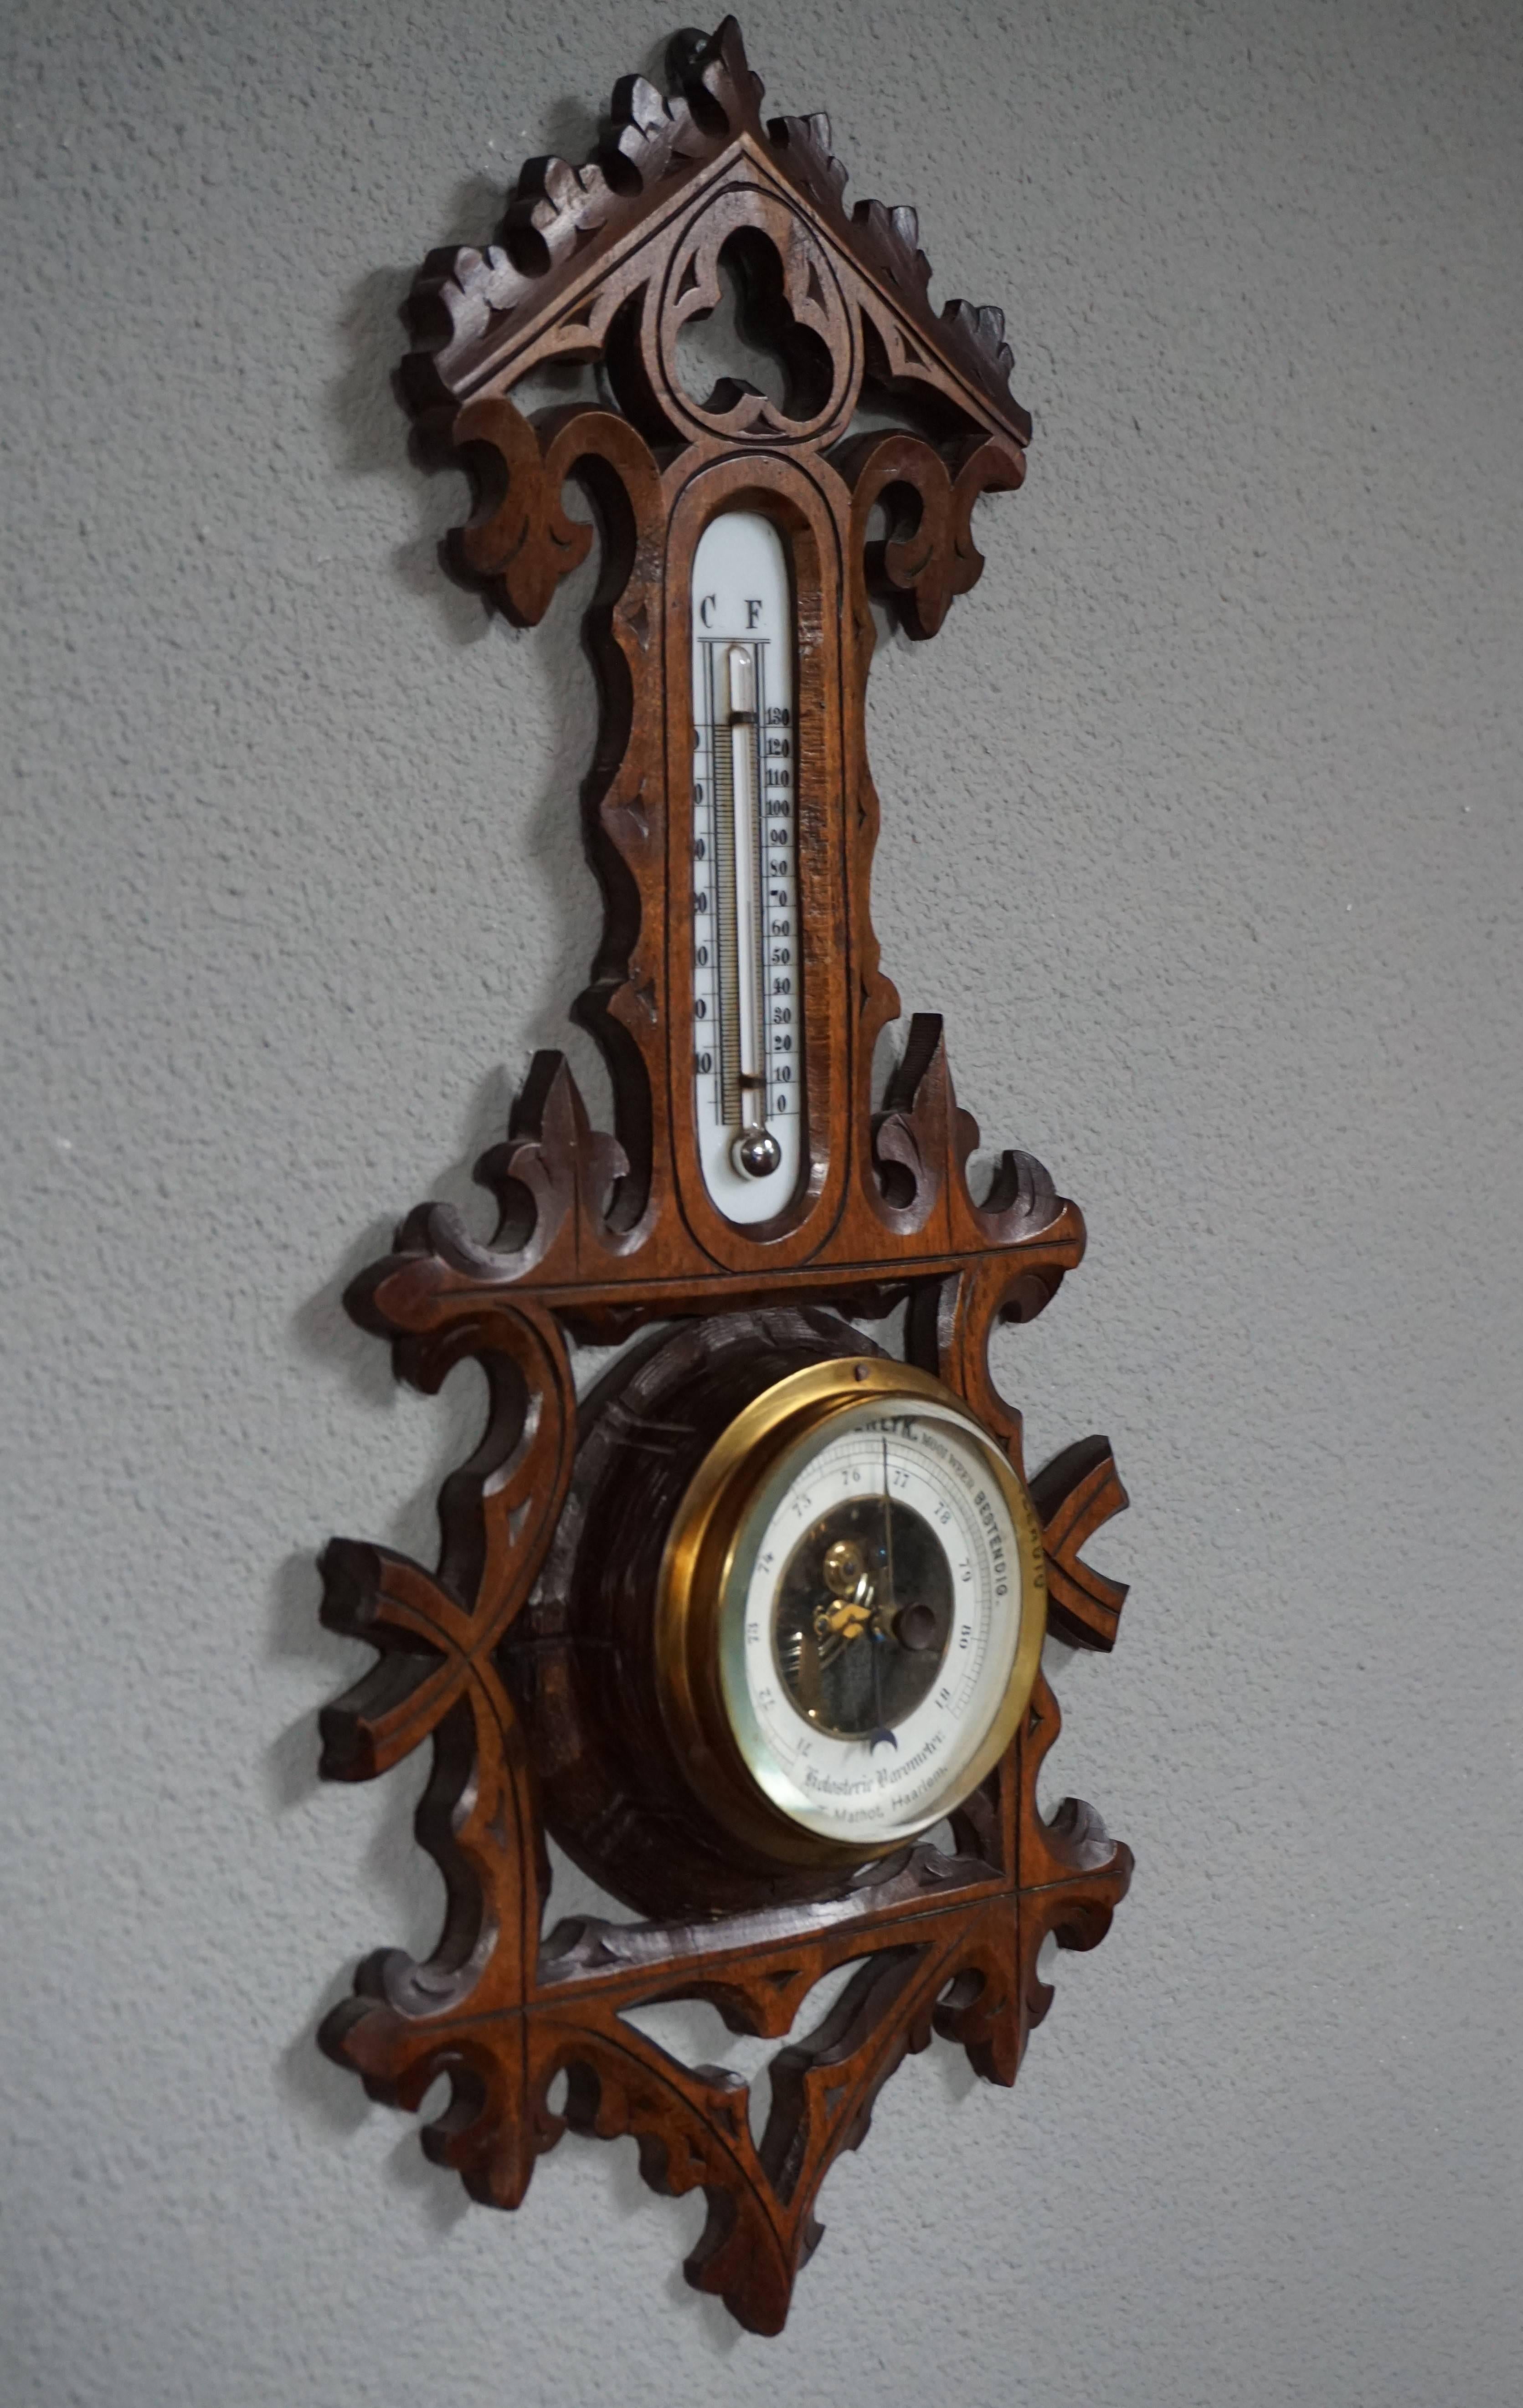 Excellent condition, Gothic Revival barometer.

This all handcrafted barometer in the Gothic style is definitely a rare find. This superb condition antique was entirely hand-crafted in the earliest years of the 1900s. With the trefoil symbol (for